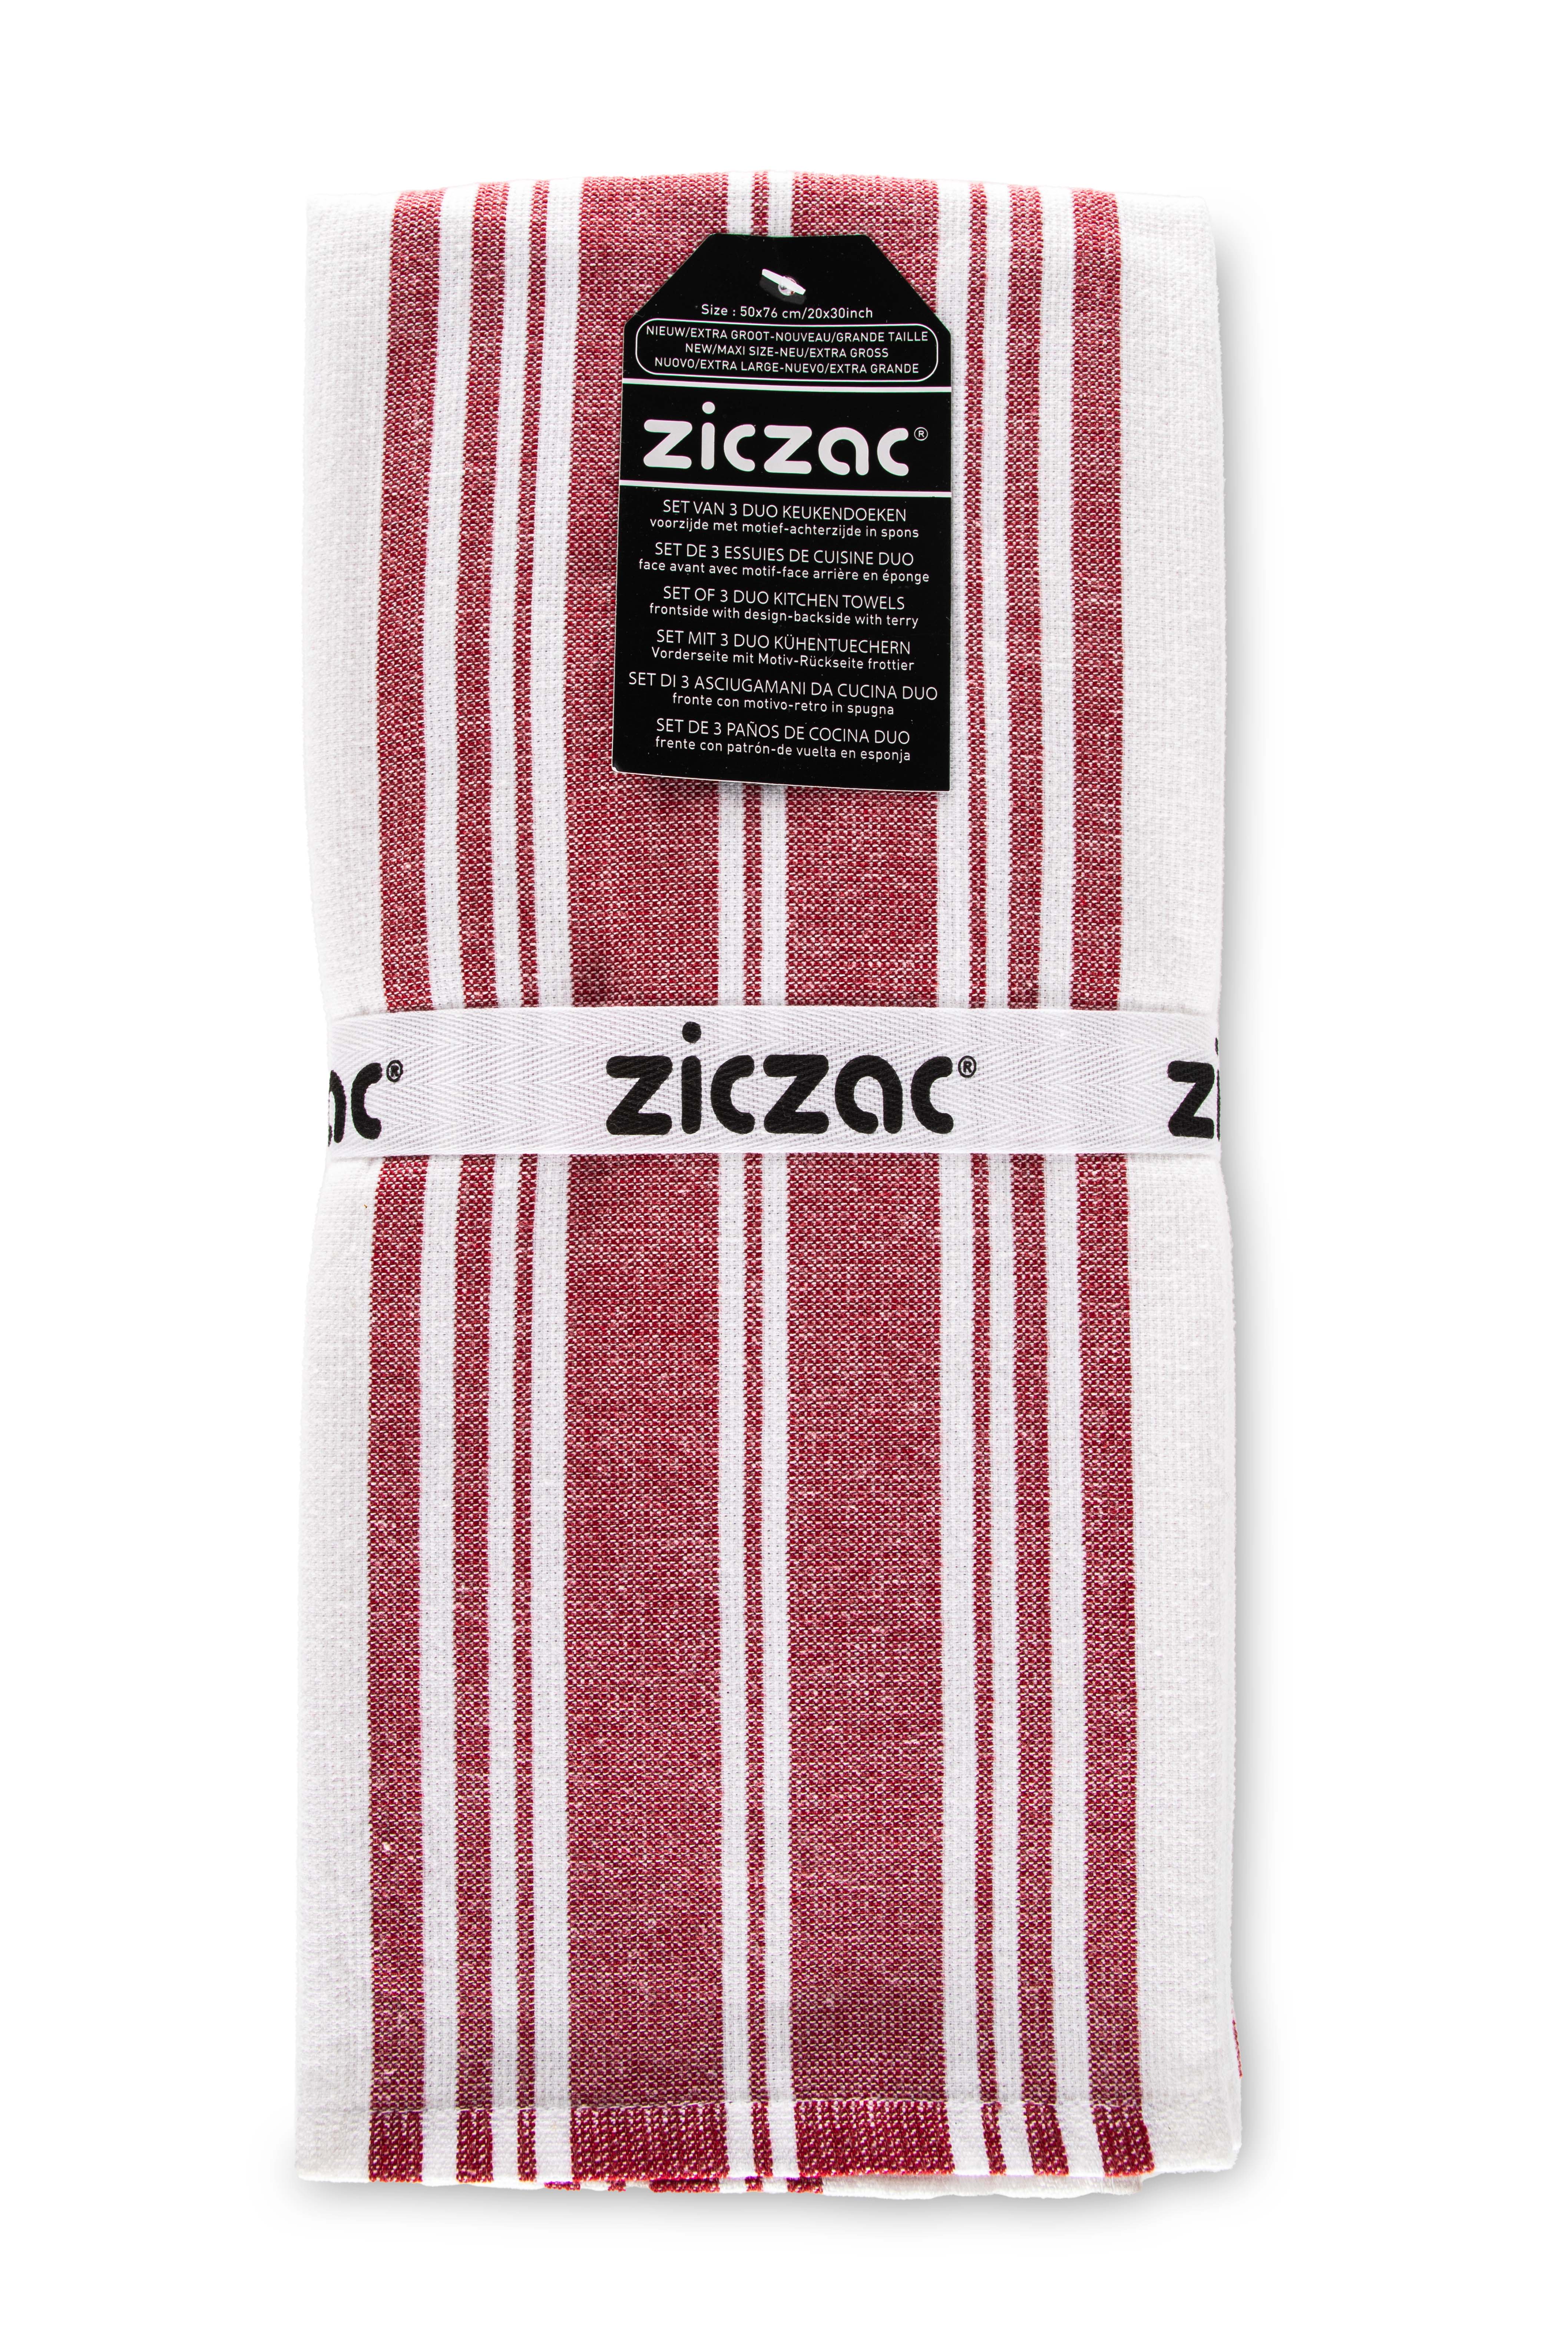 Torchons Culinary Duo Stripe 50x76 rouge, set3